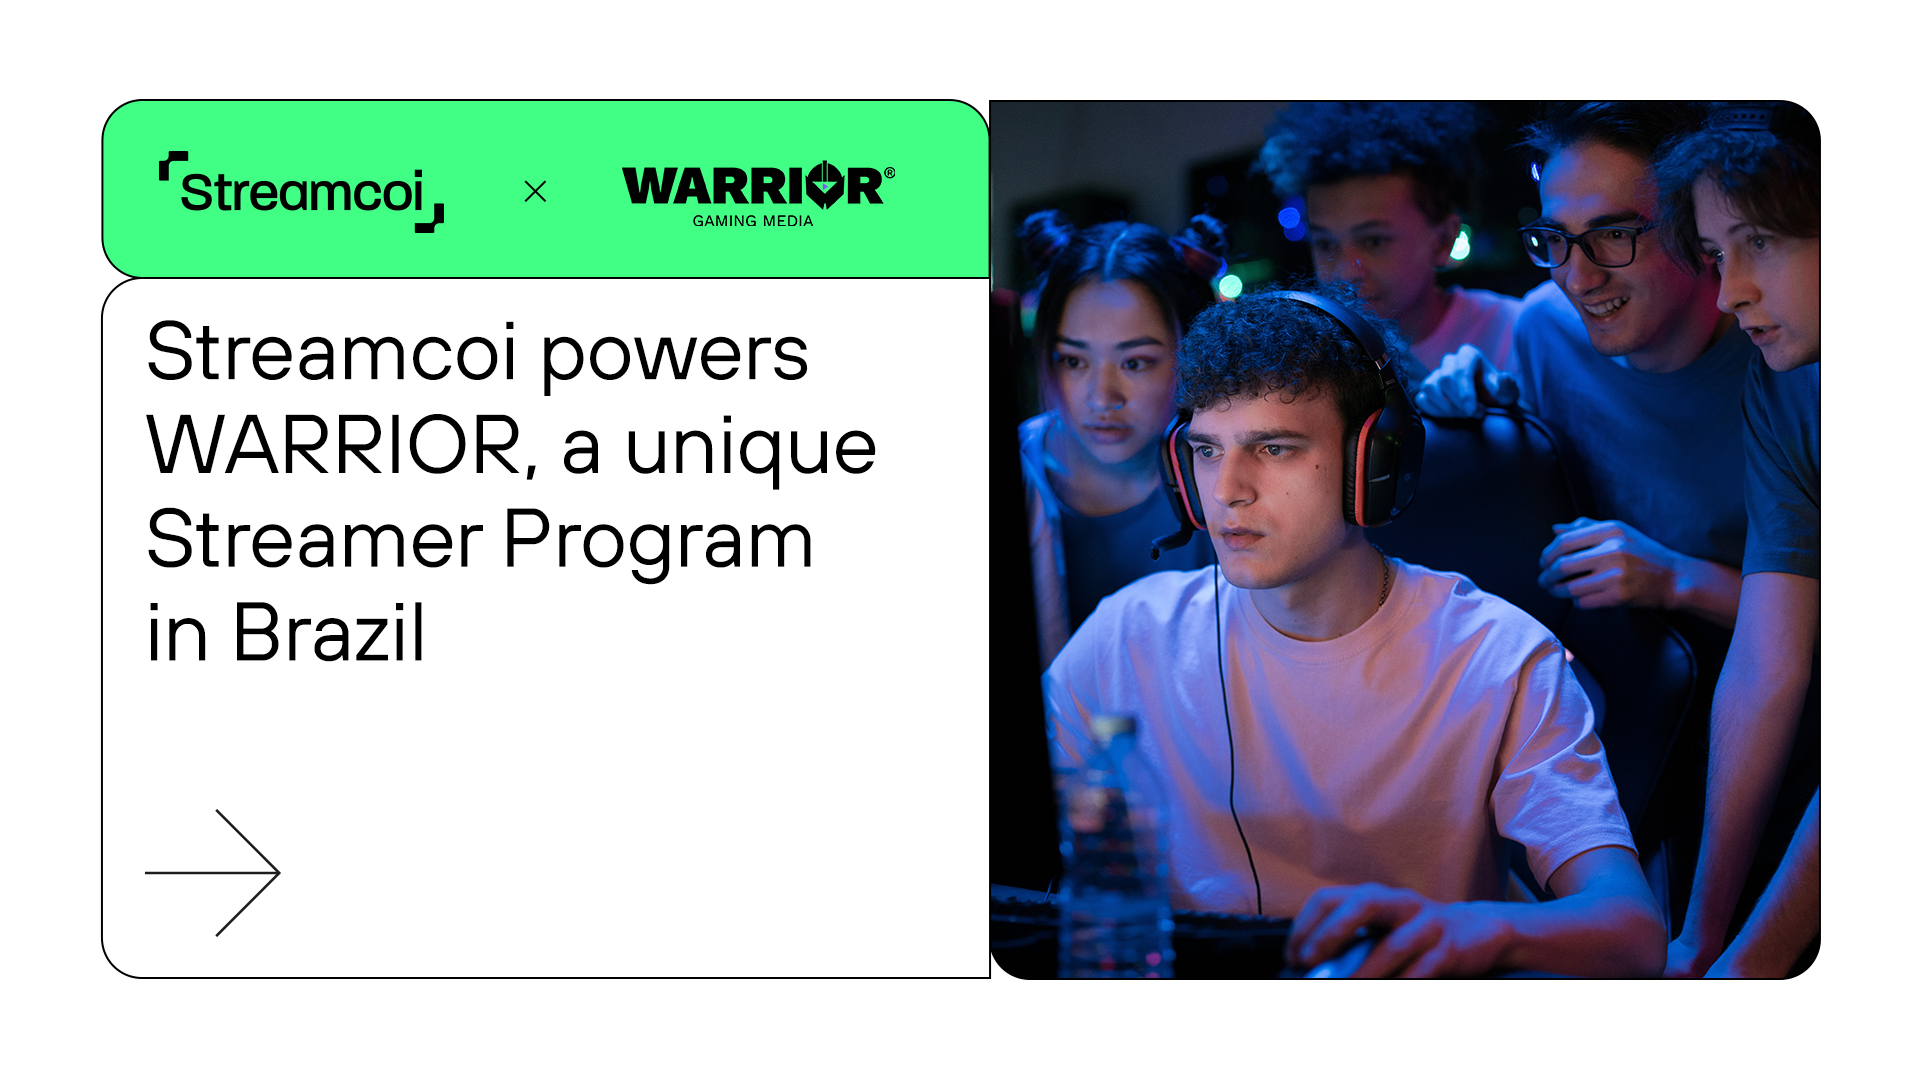 Top Brazilian streamers join WARRIOR, a huge streamer program powered by Streamcoi